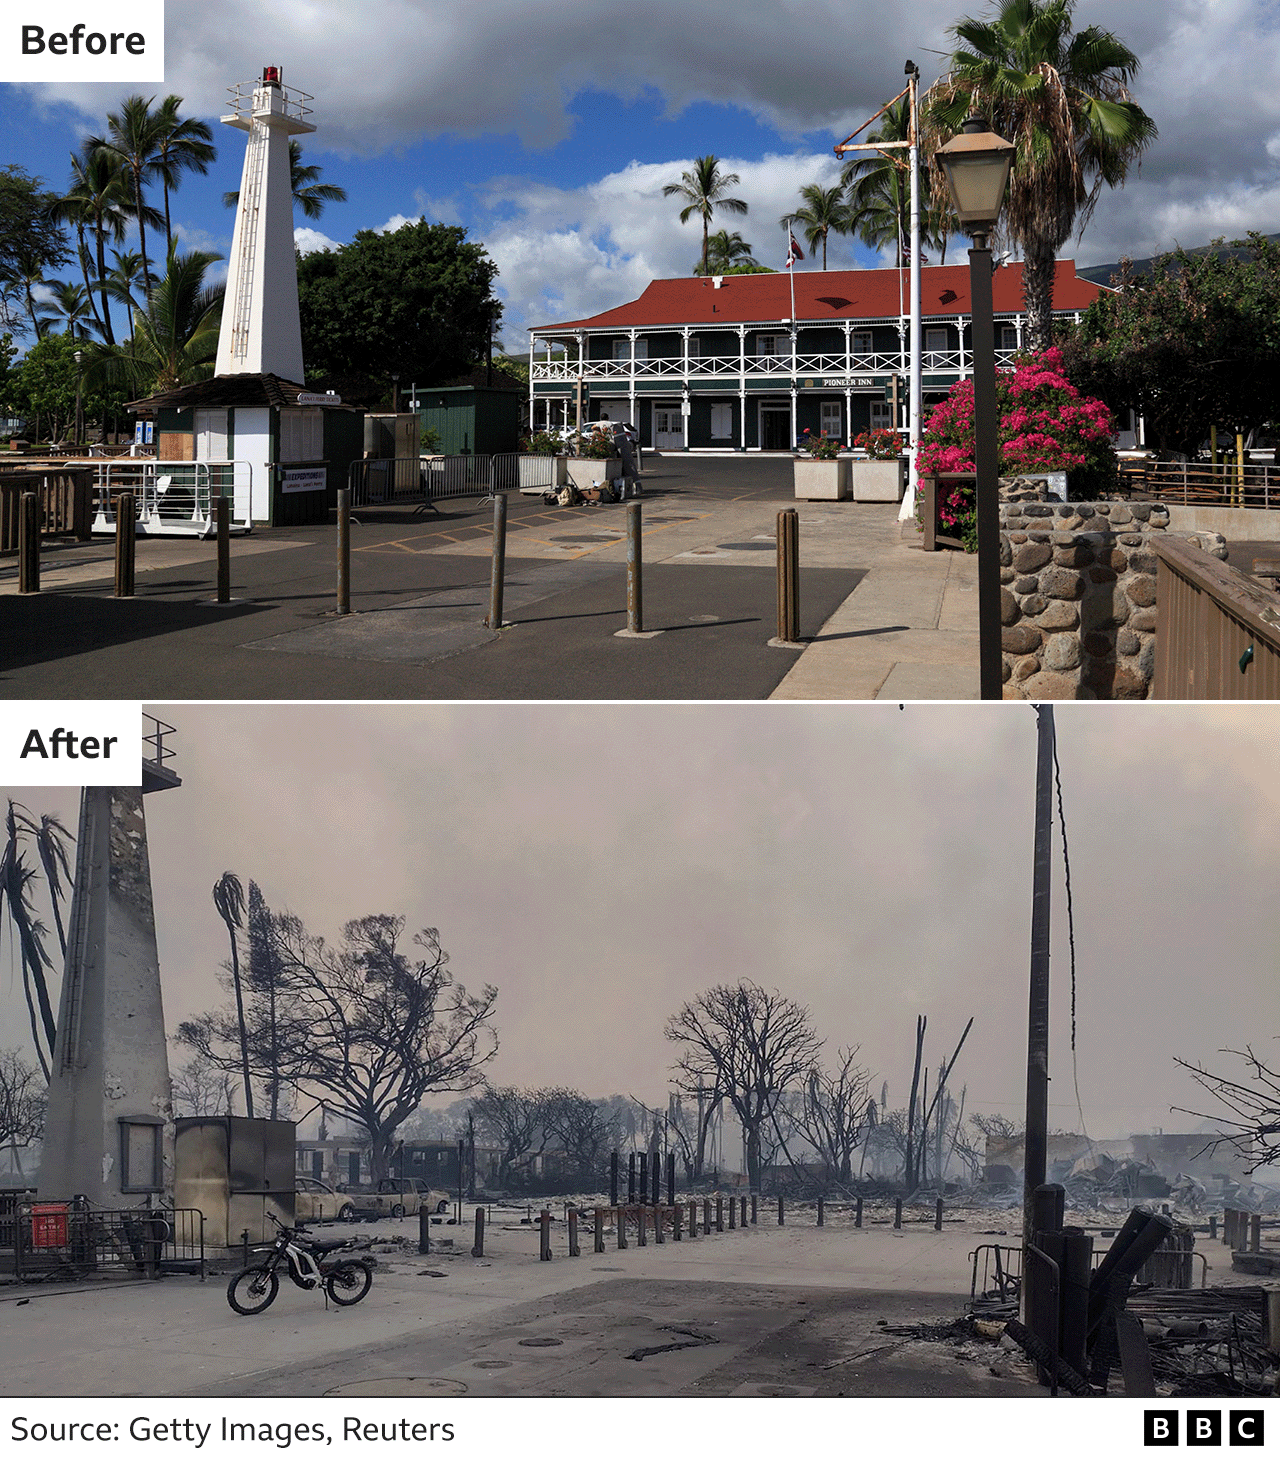 Before and after images showing Lahaina lighthouse and the Pioneer Inn